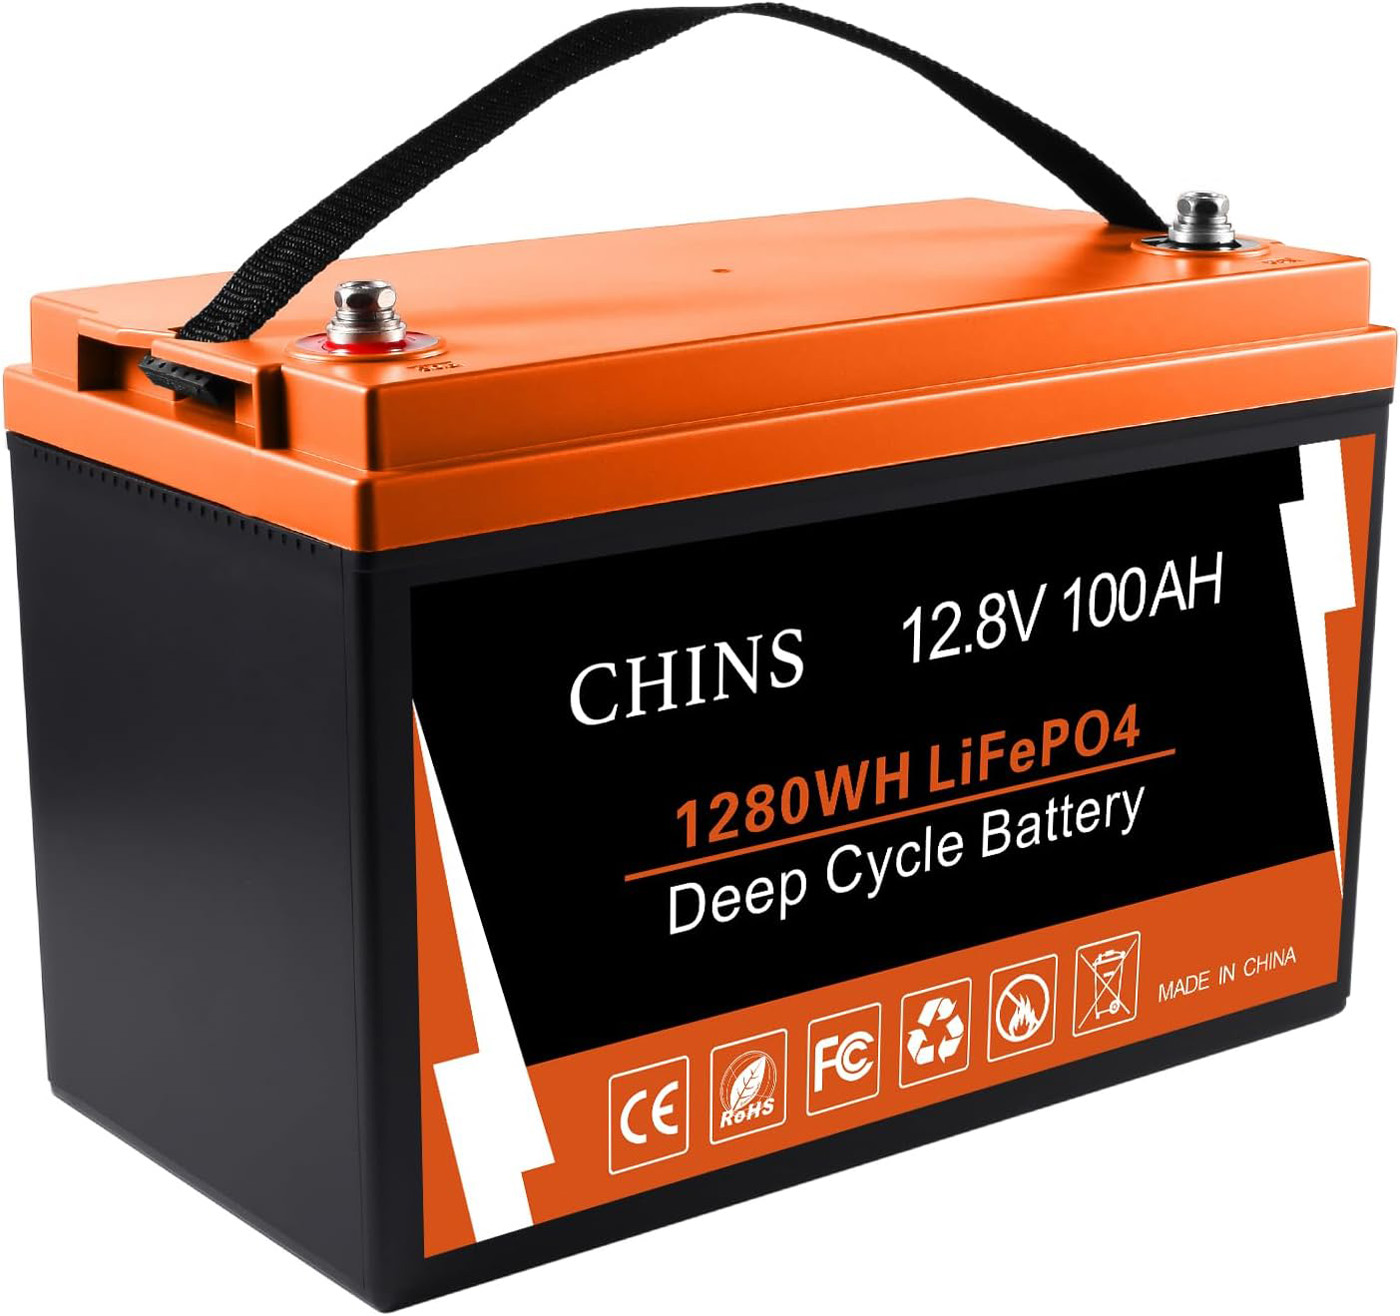 CHINS Bluetooth LiFePO4 Smart 12V 100AH Lithium Iron Battery Low Temperature Charging Mobile Phone APP